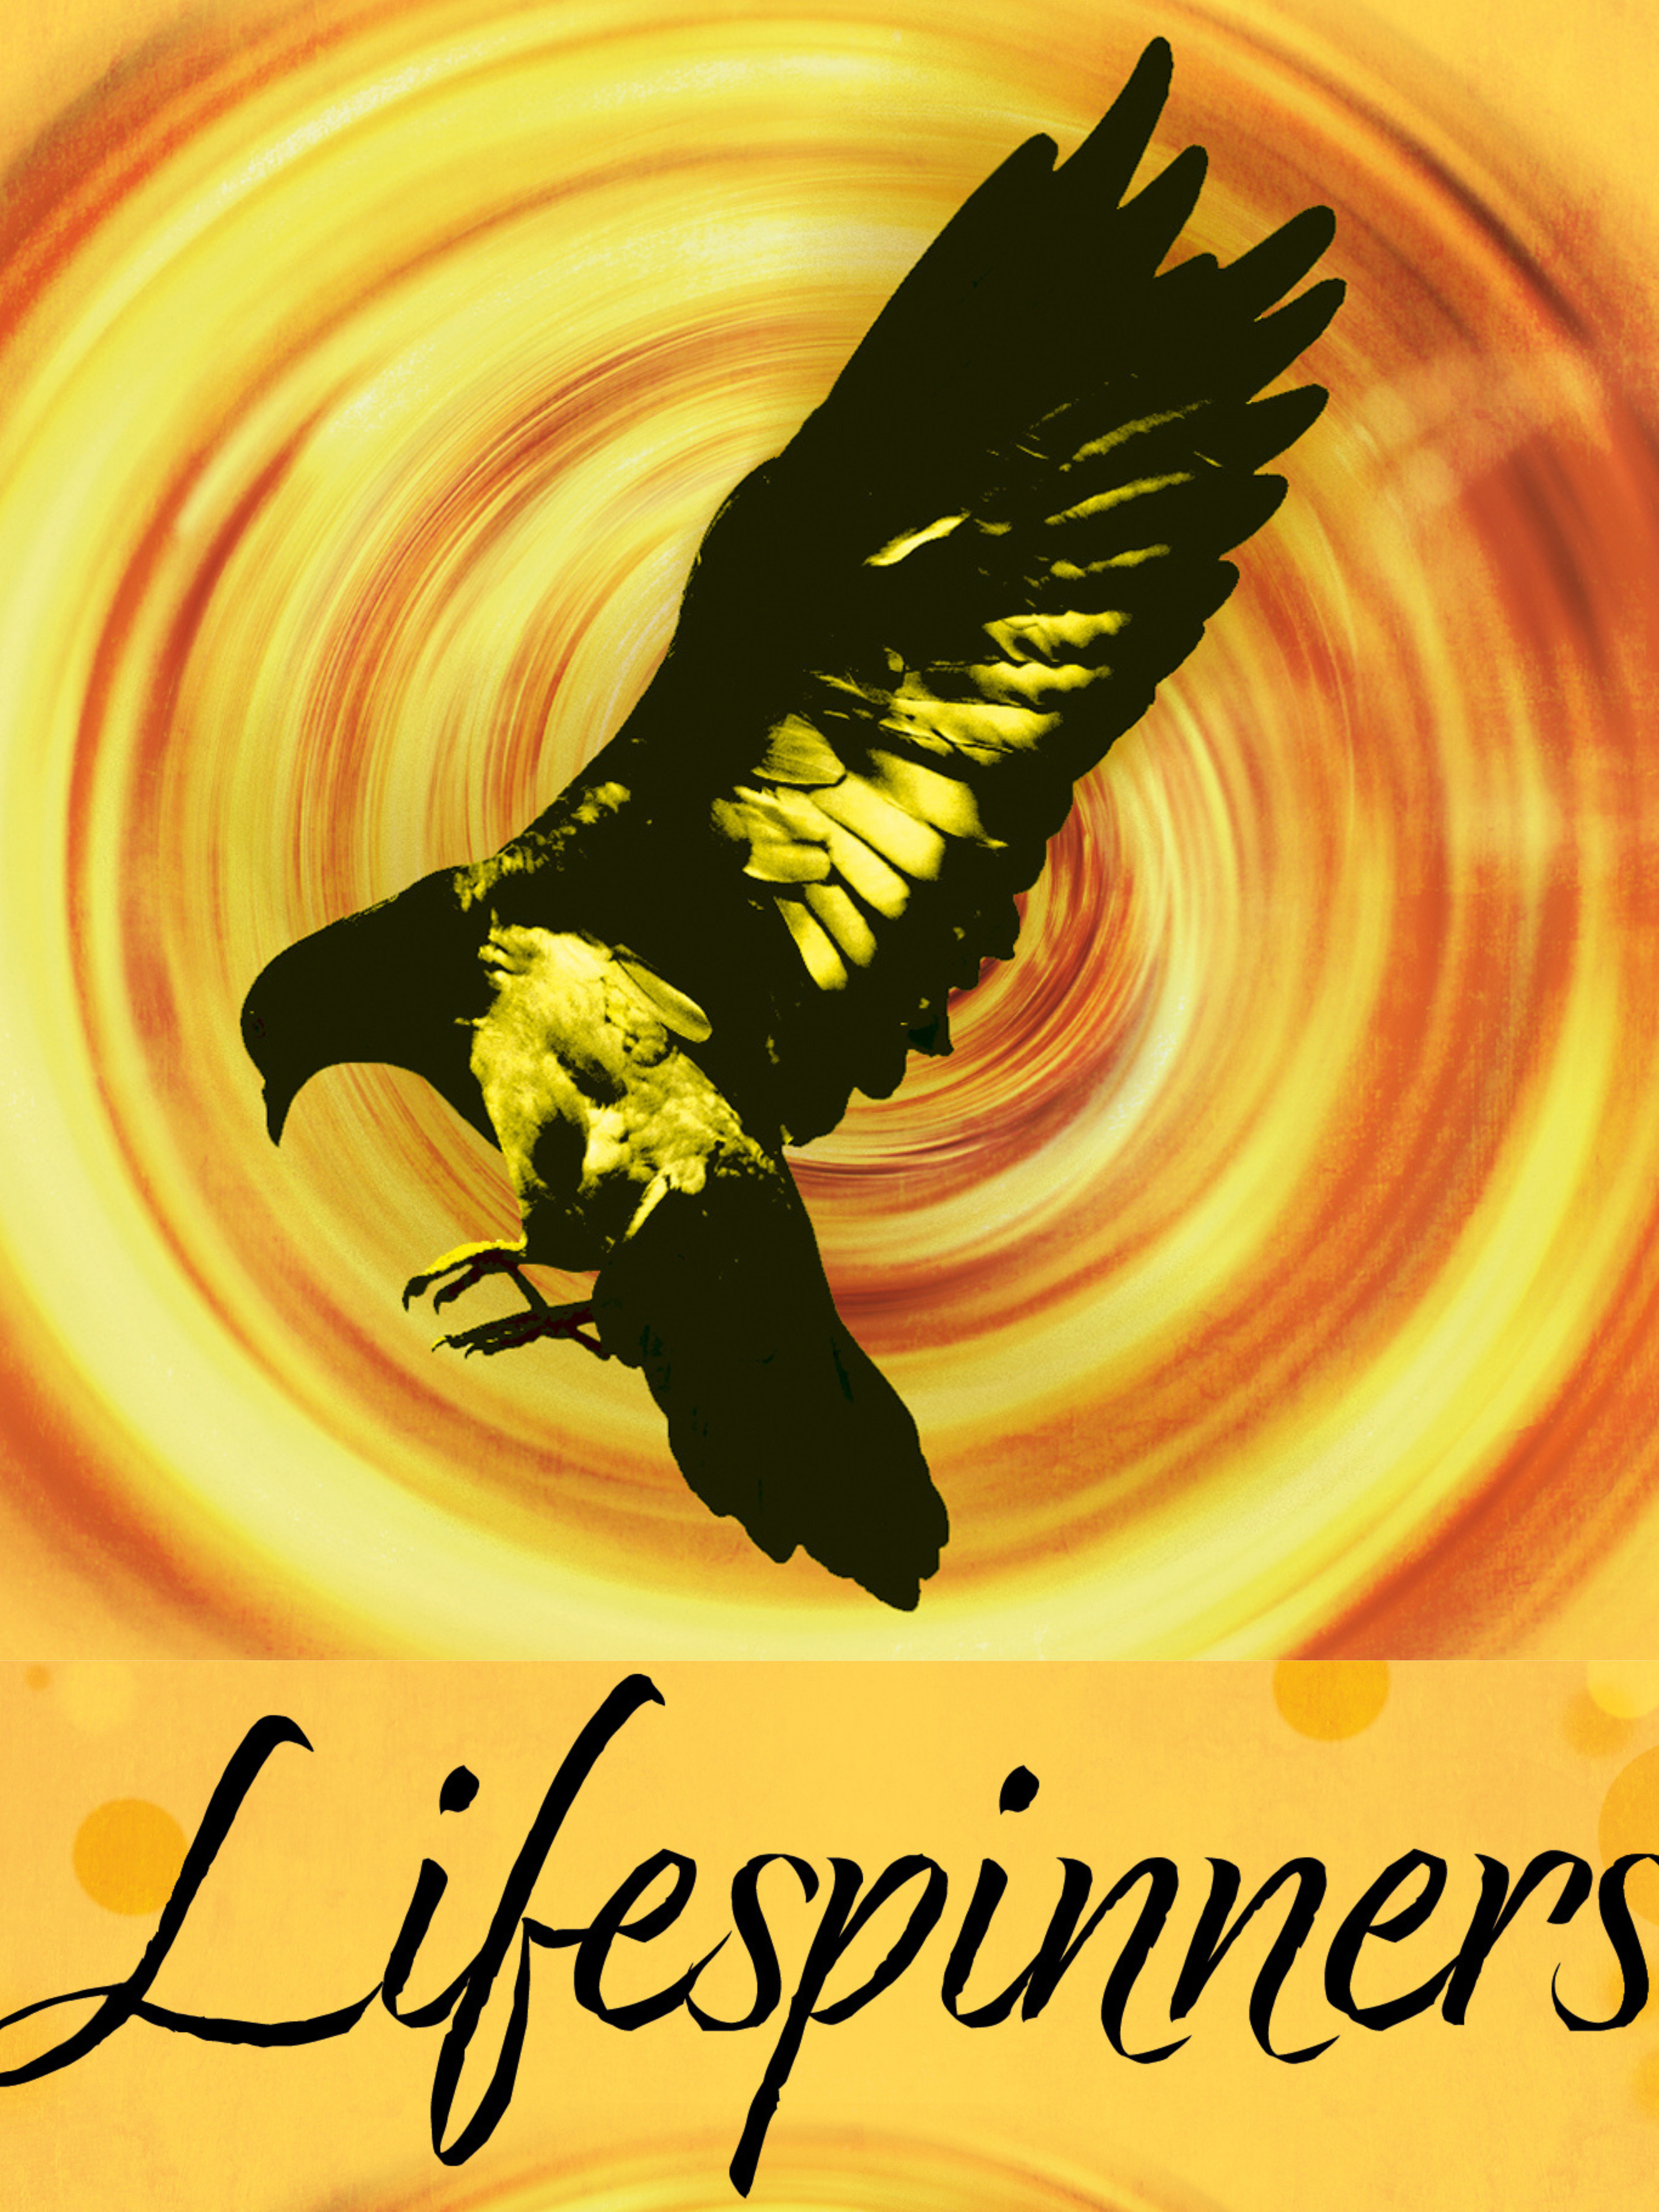 The Lifespinners logo, showing a flying pigeon in front of a gold and yellow spiral swirling into the distance. The title 'Lifespinners' is written below